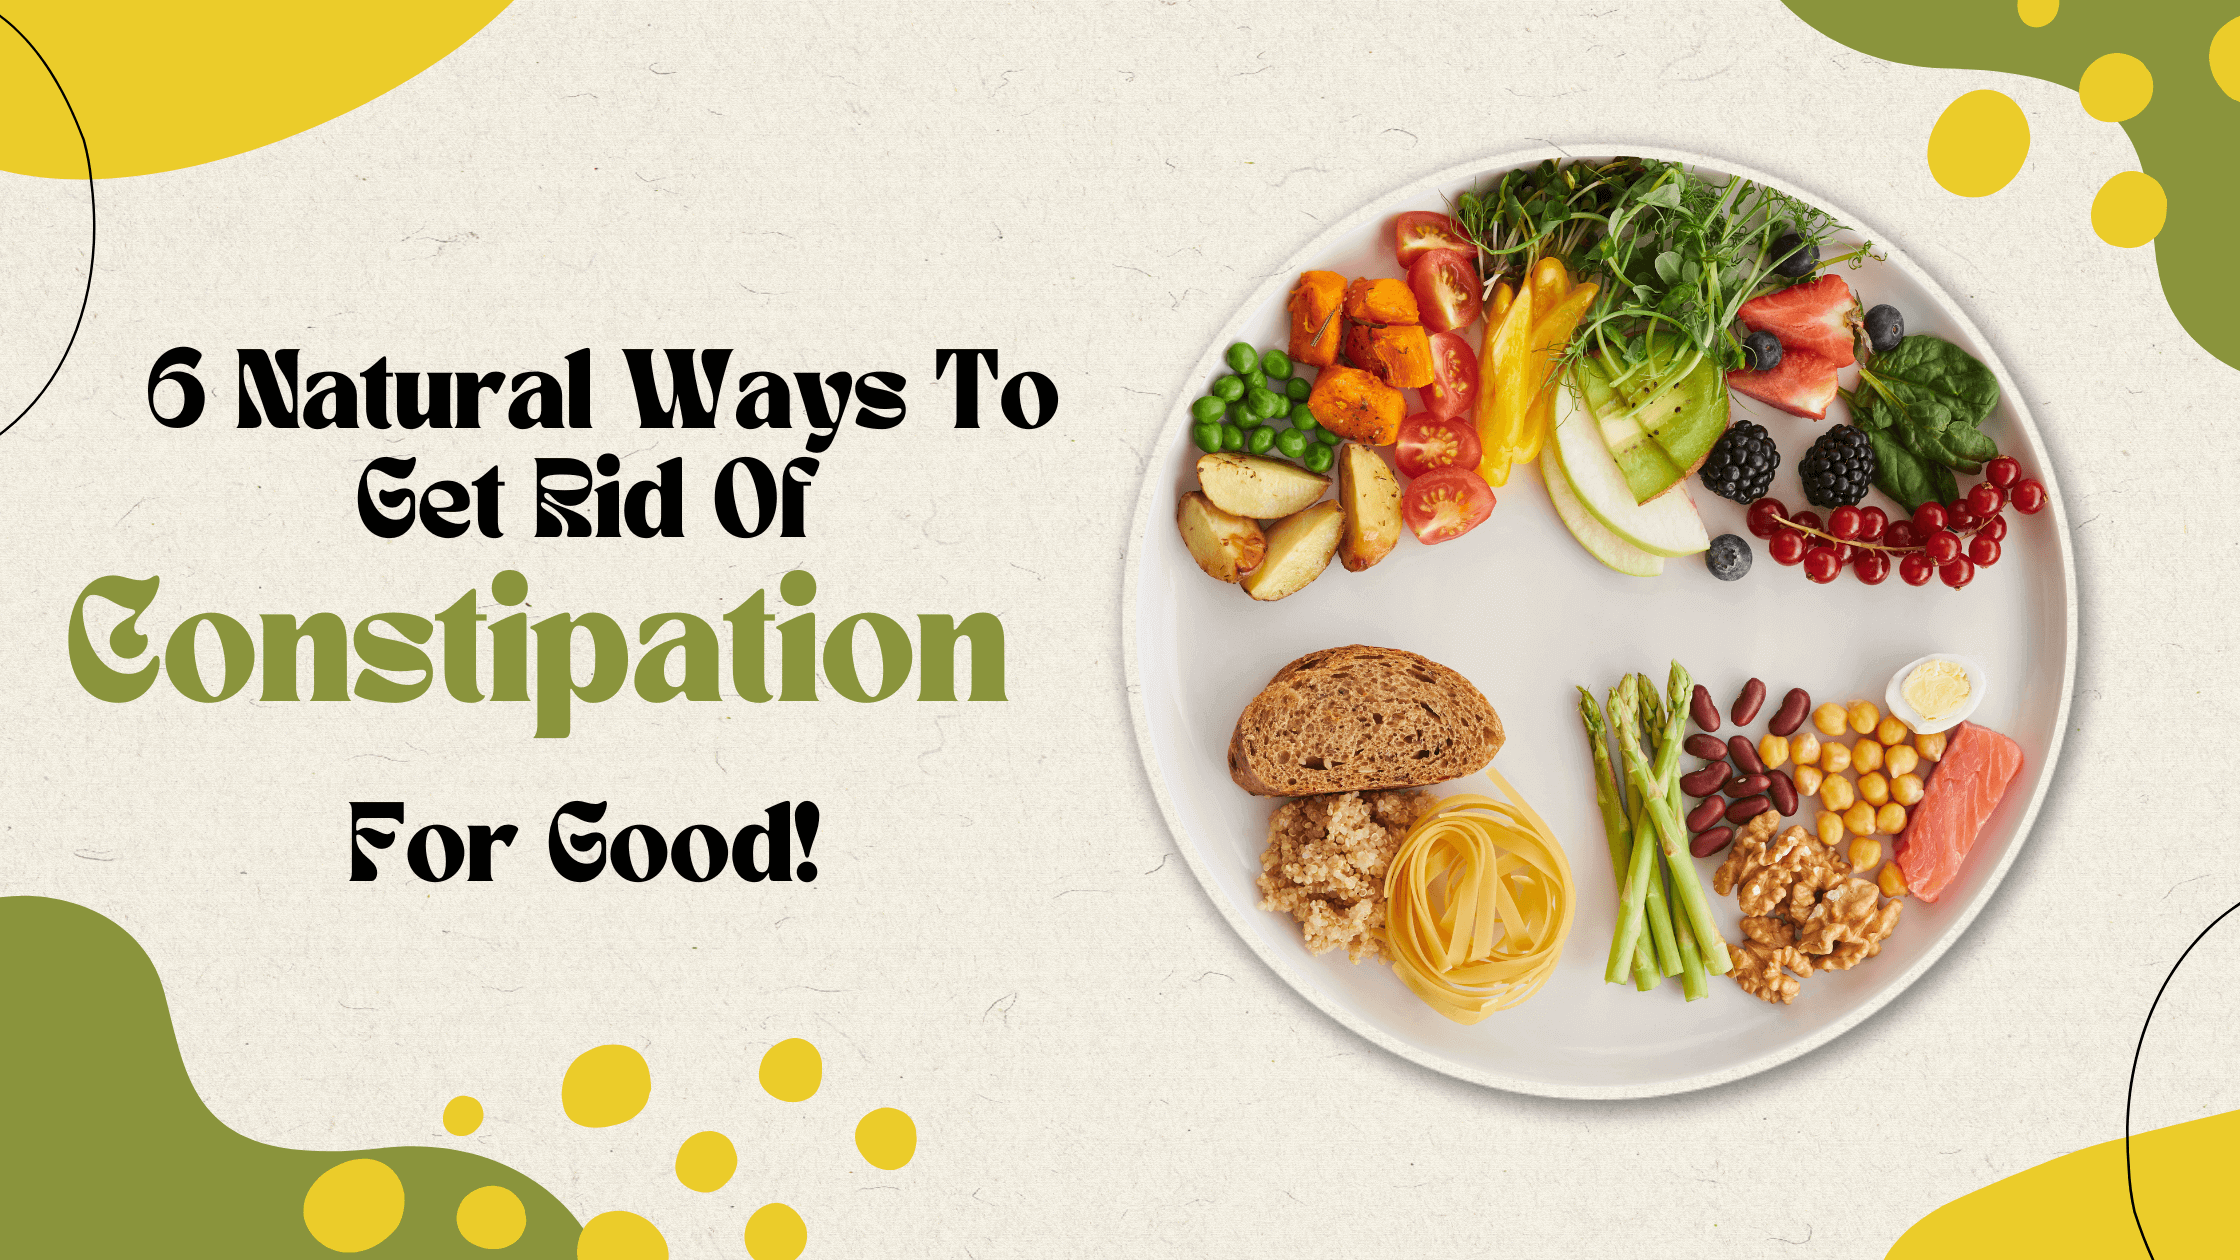 6 Natural Ways To Get Rid Of Constipation For Good!